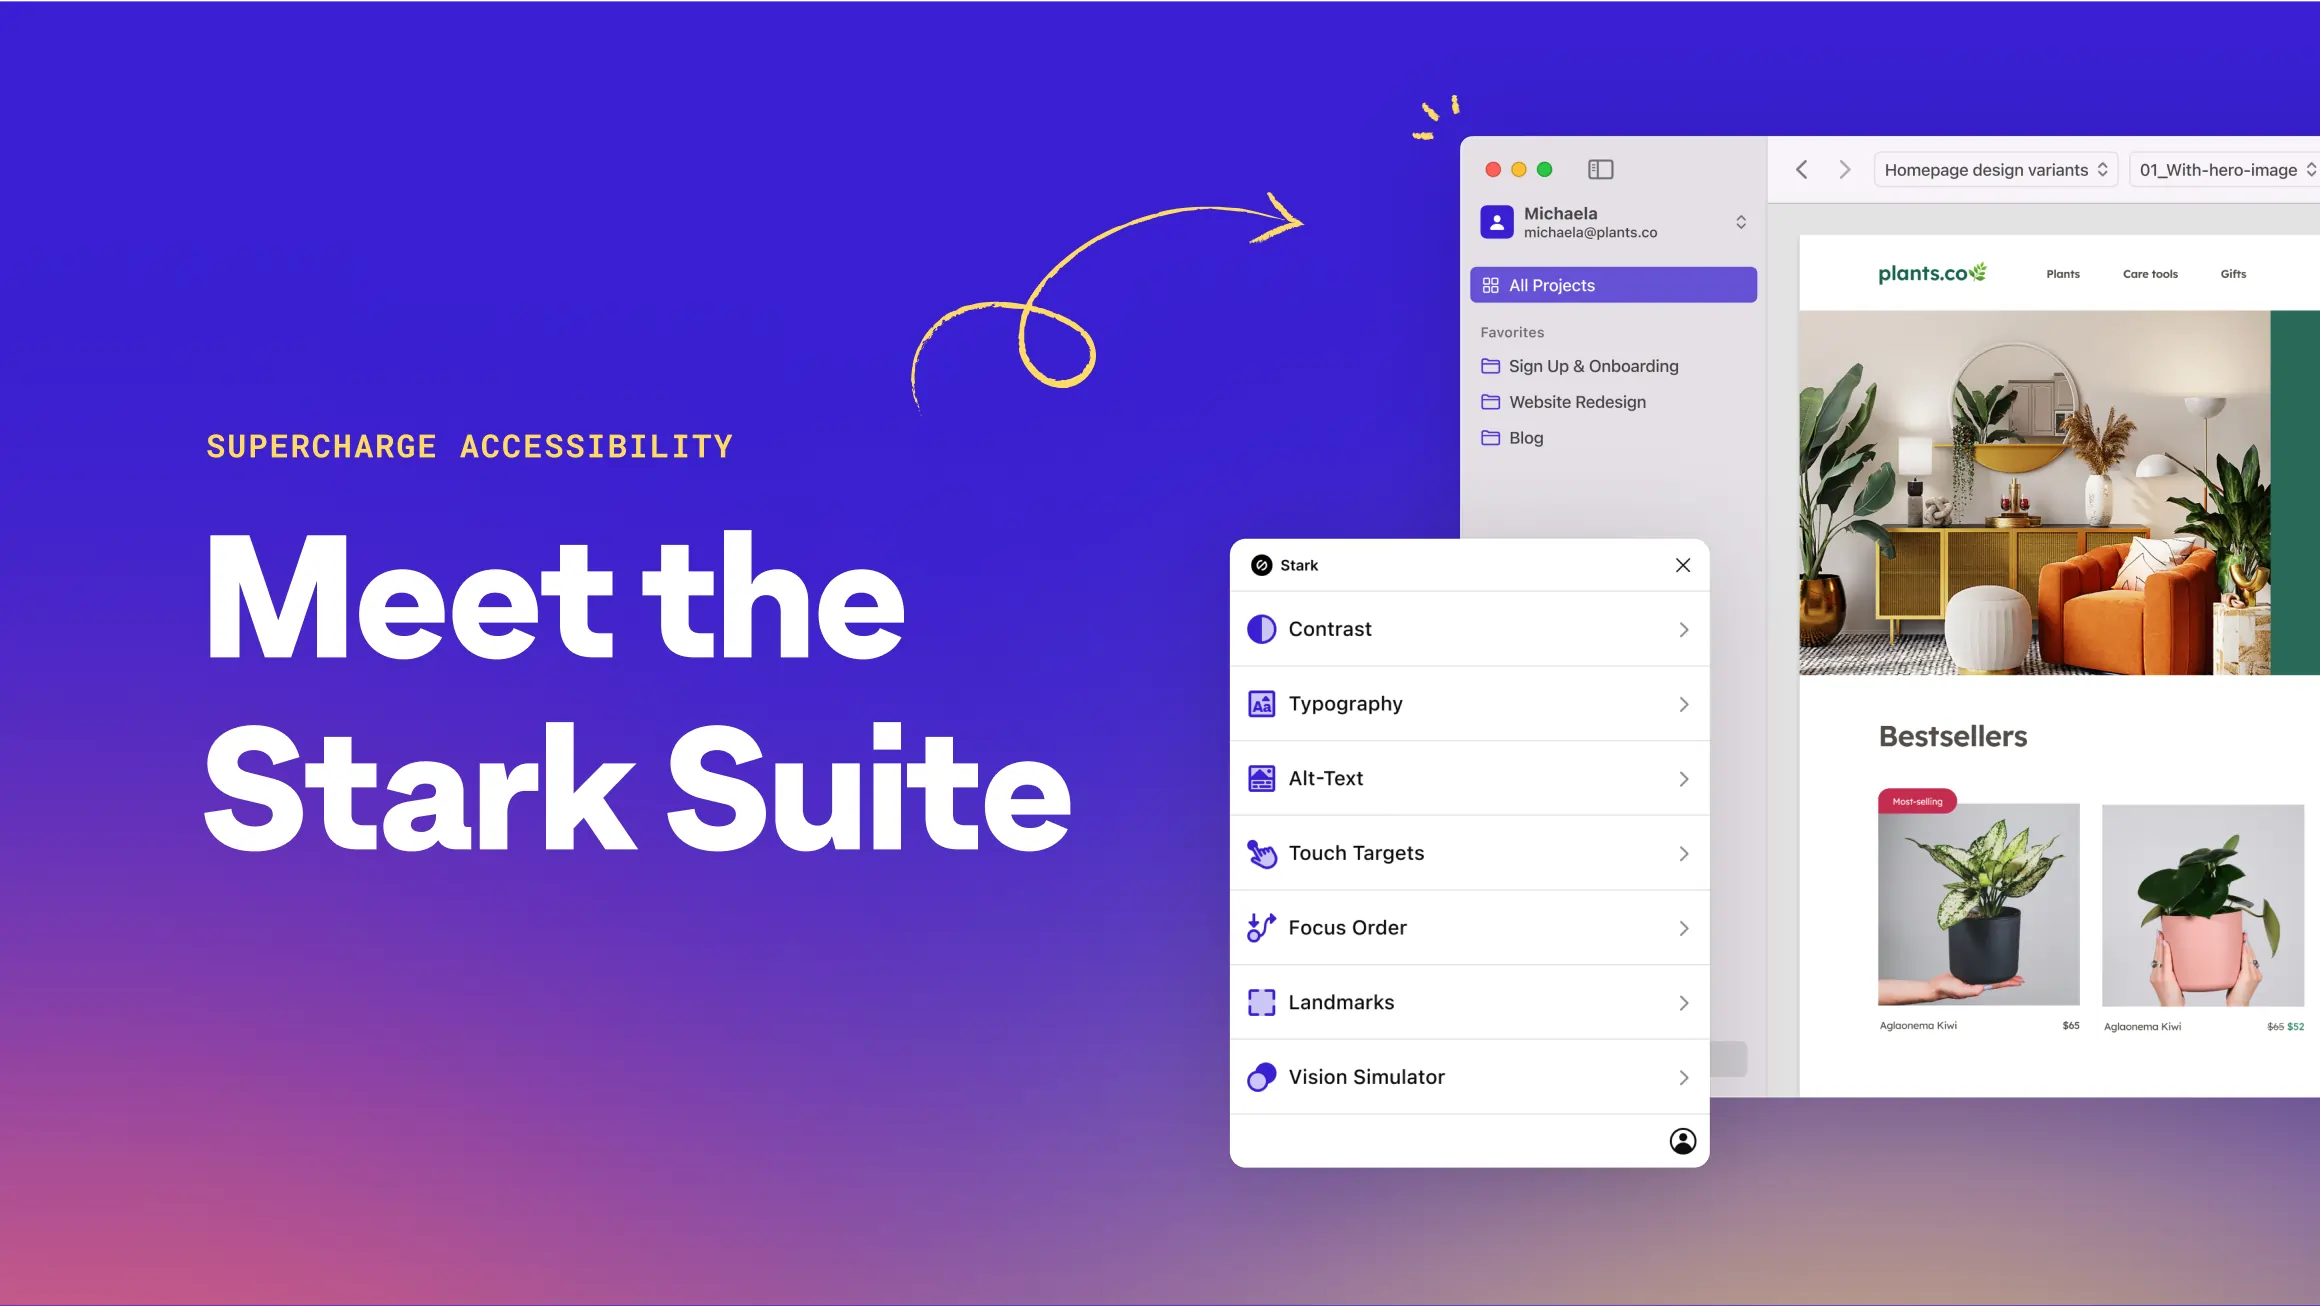 Preview image for the 'Meet the Stark Suite' video. Shows the Stark for Mac app with the main menu of the Stark plugin floating next to it on the left.